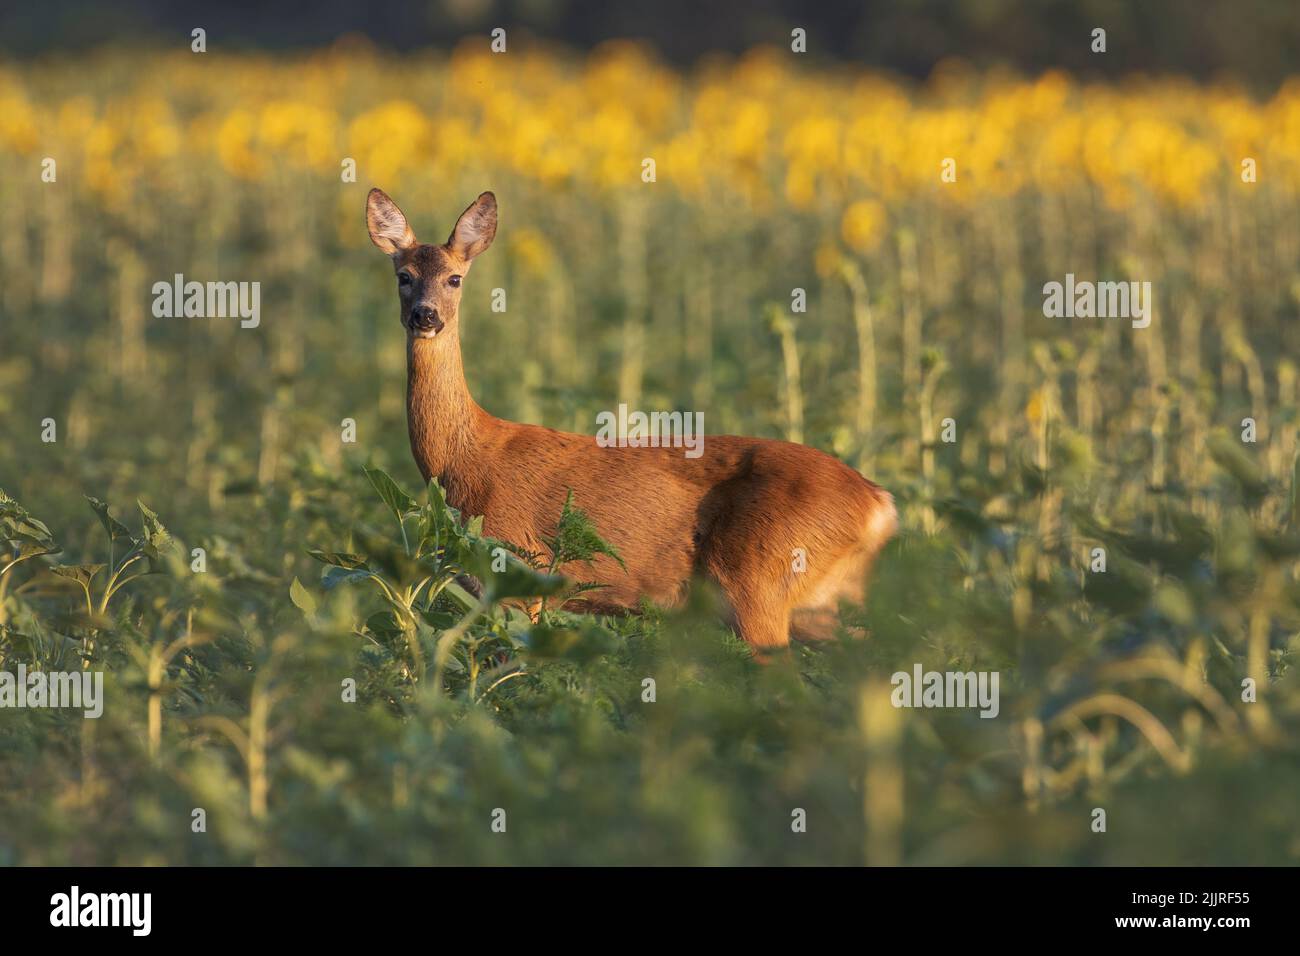 A beautiful view of a deer in a field Stock Photo